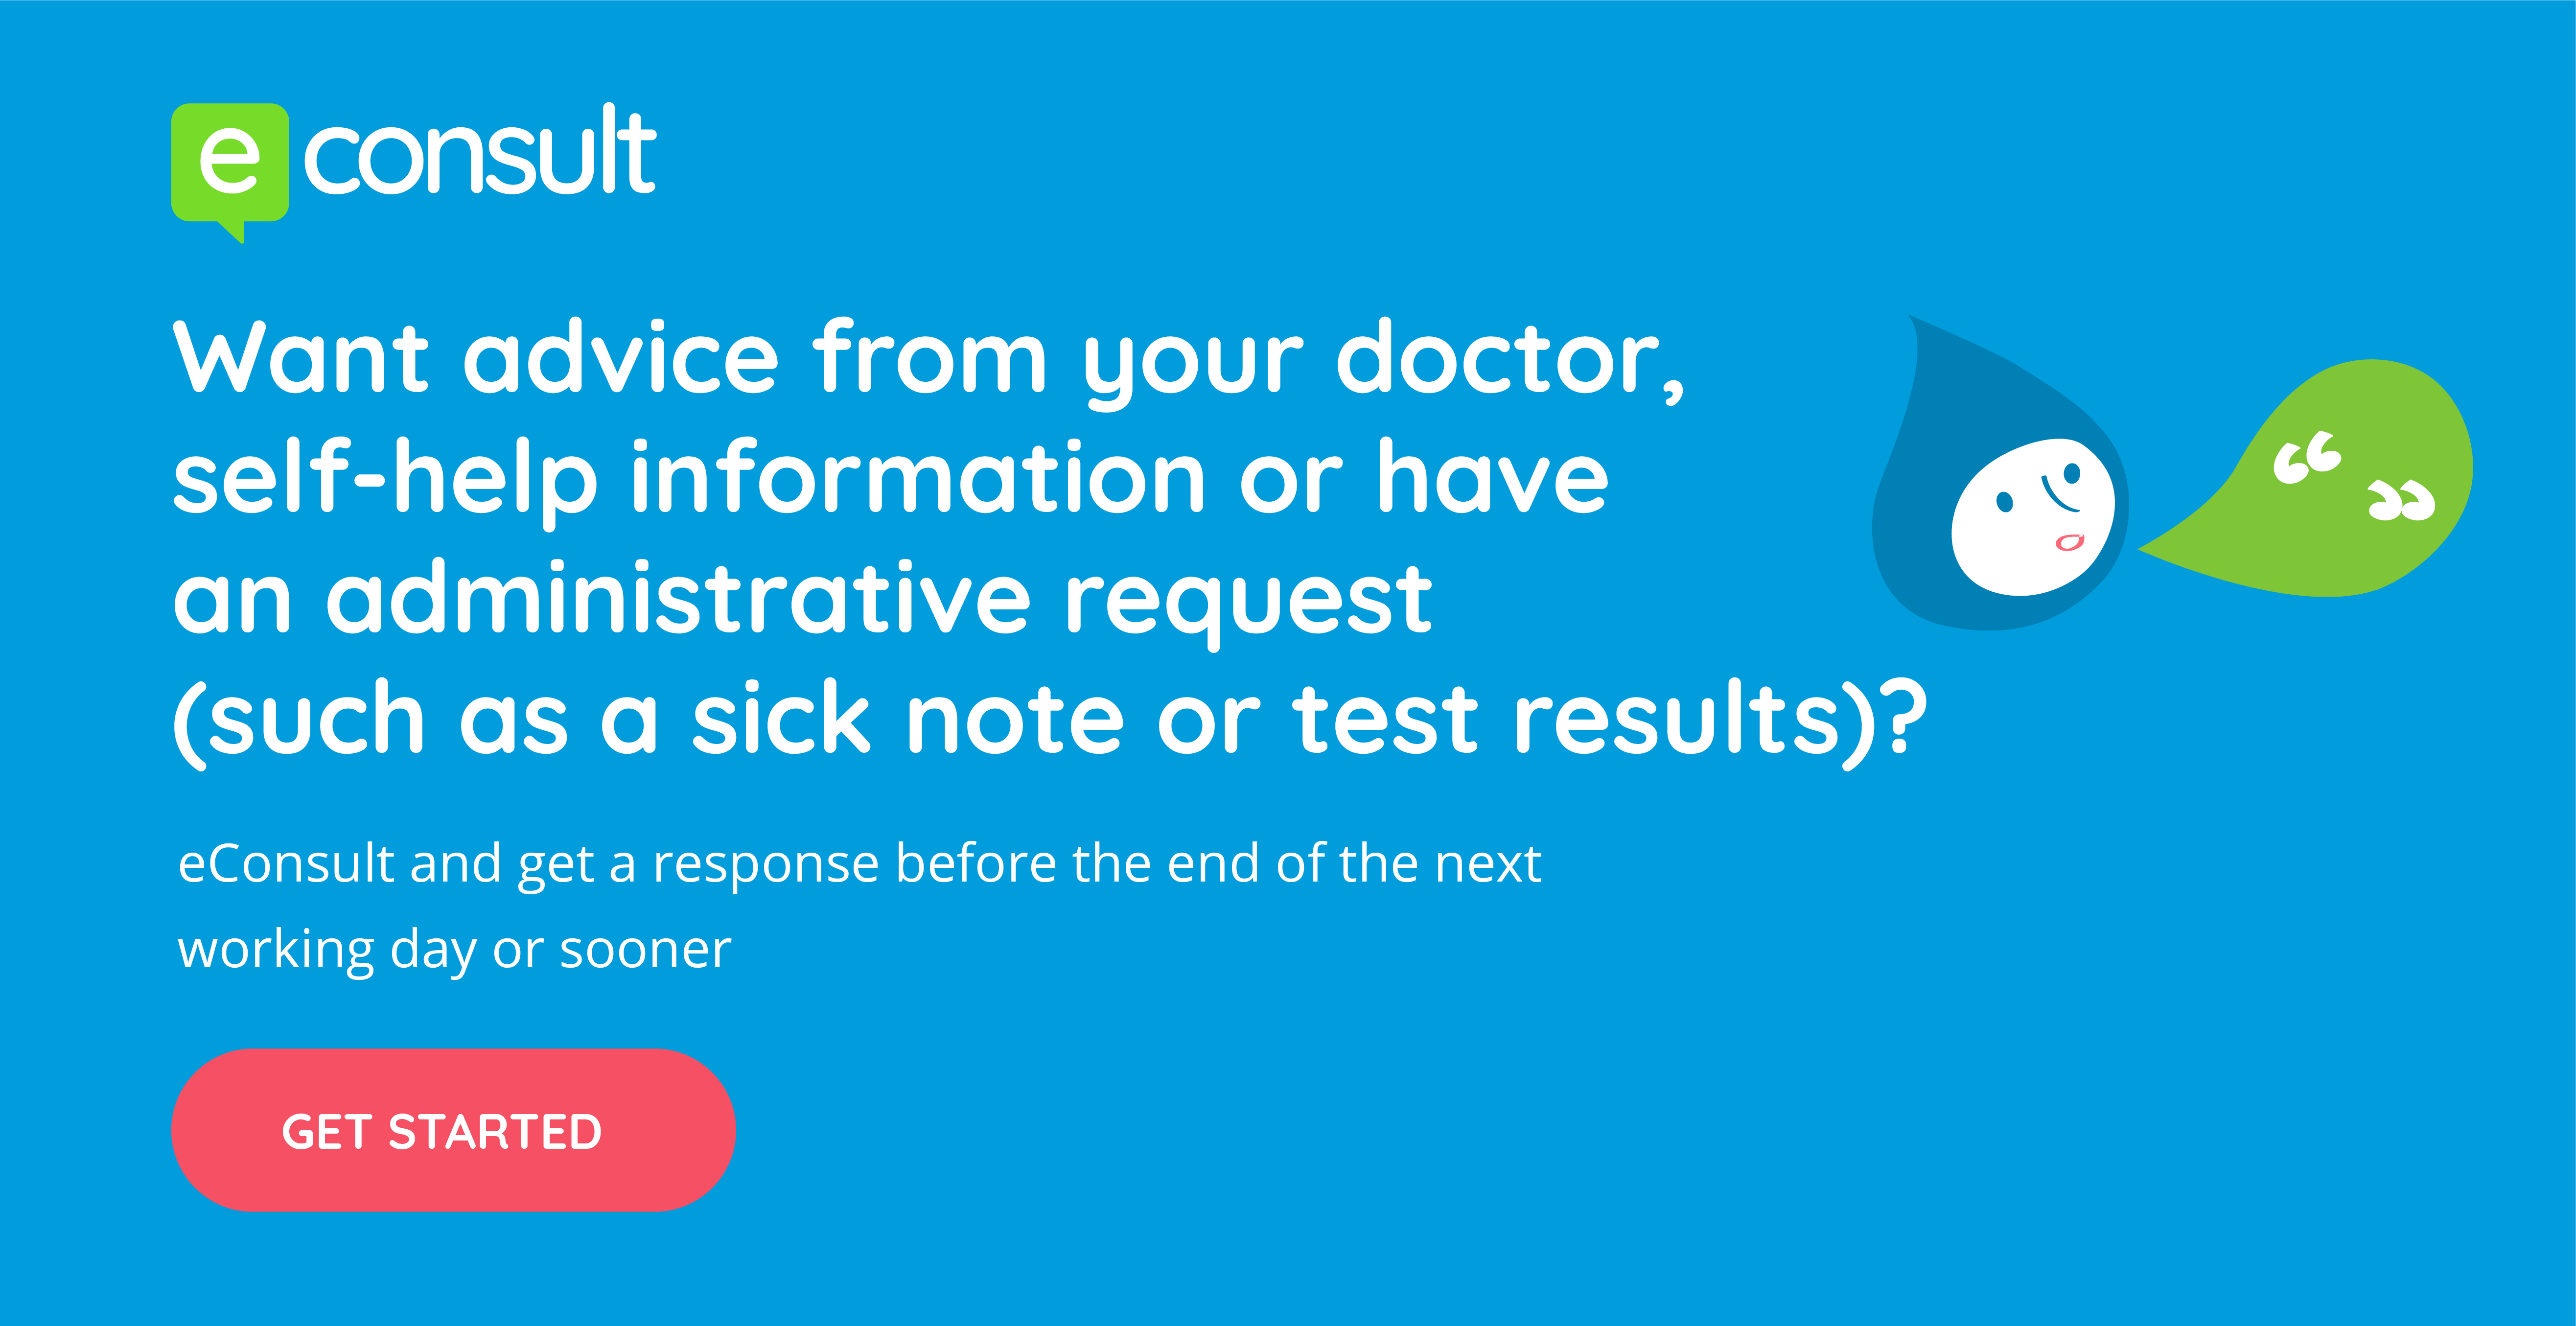 eConsult Want advice from your doctor self help information or have an administrative request such as a sick note or test results? eConsult and get a response before the end of the next working day or sooner get started